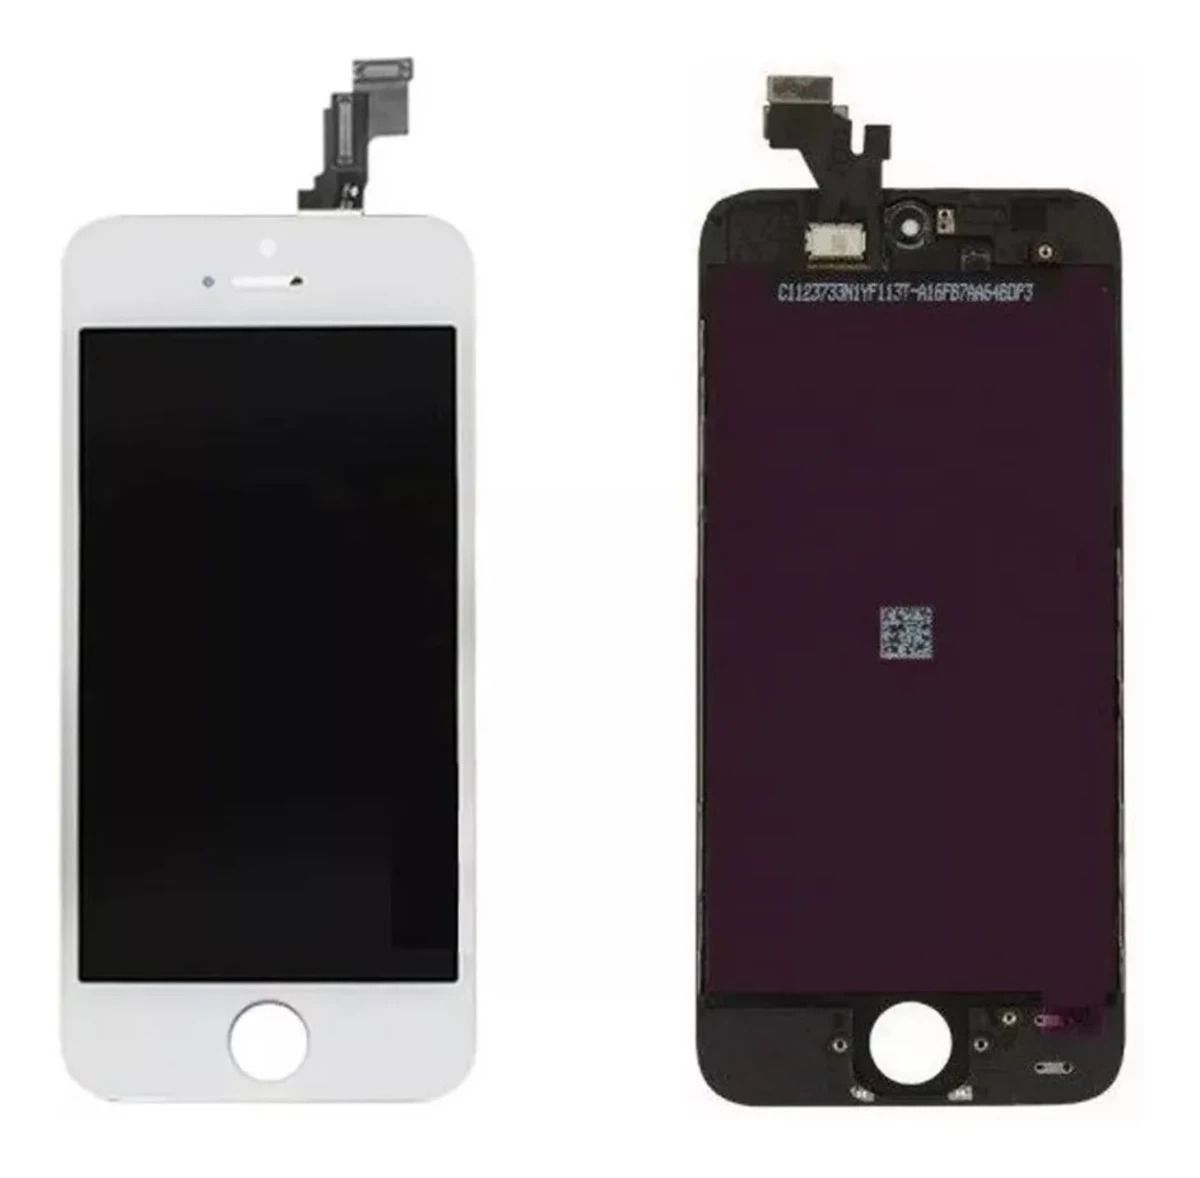 Tela Touch Frontal Lcd Apple iPhone 5c 1529 A1456 1507 1532